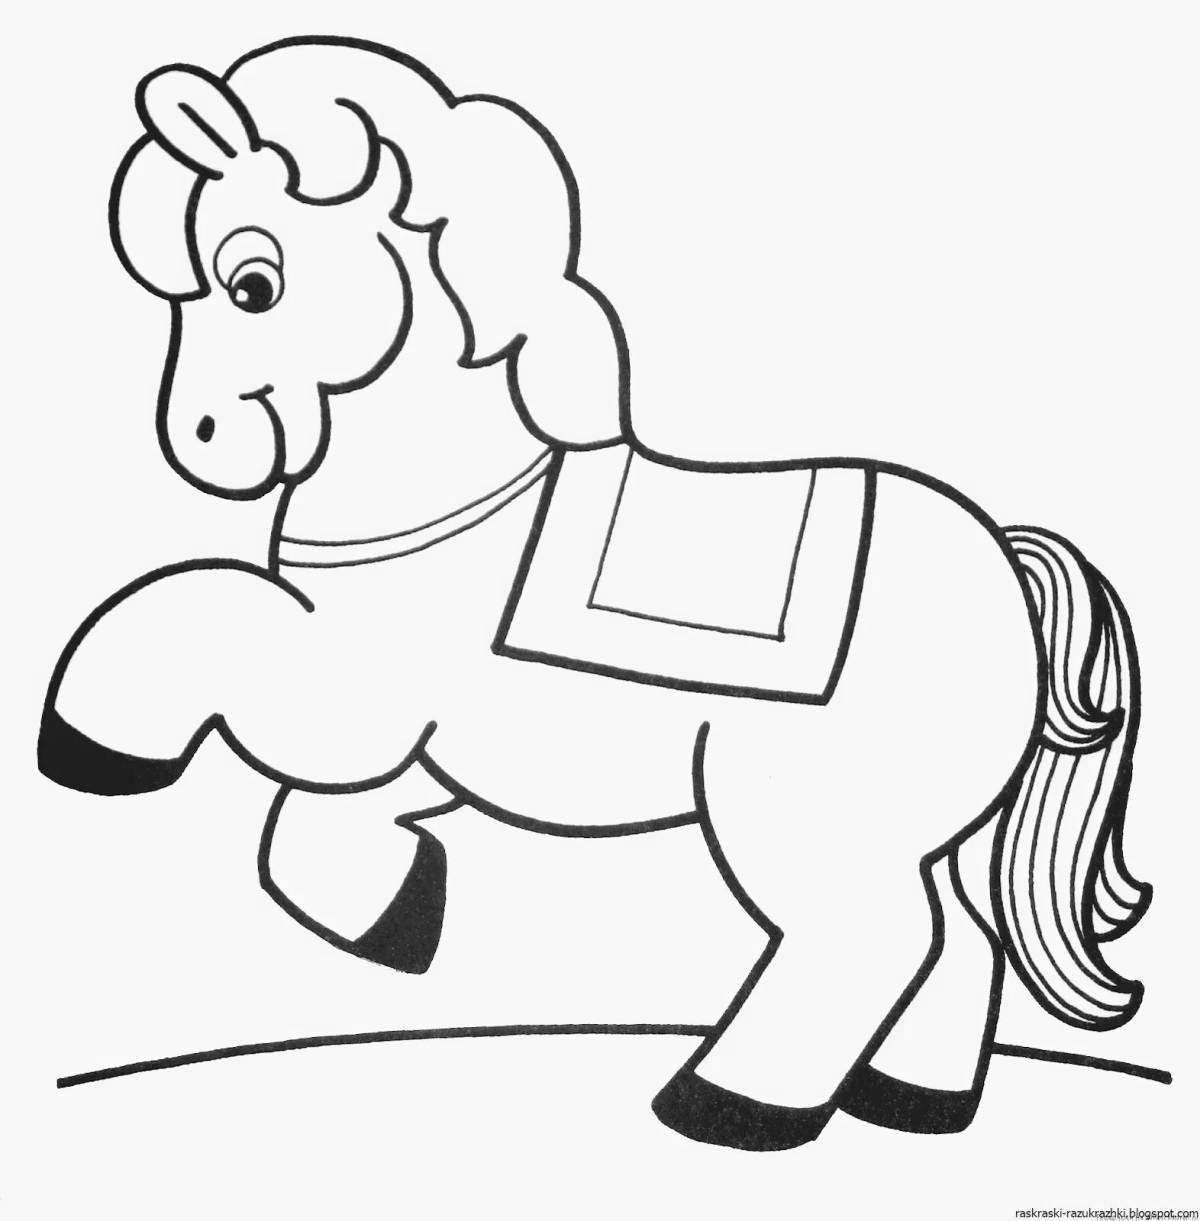 Attractive horse coloring book for 2-3 year olds